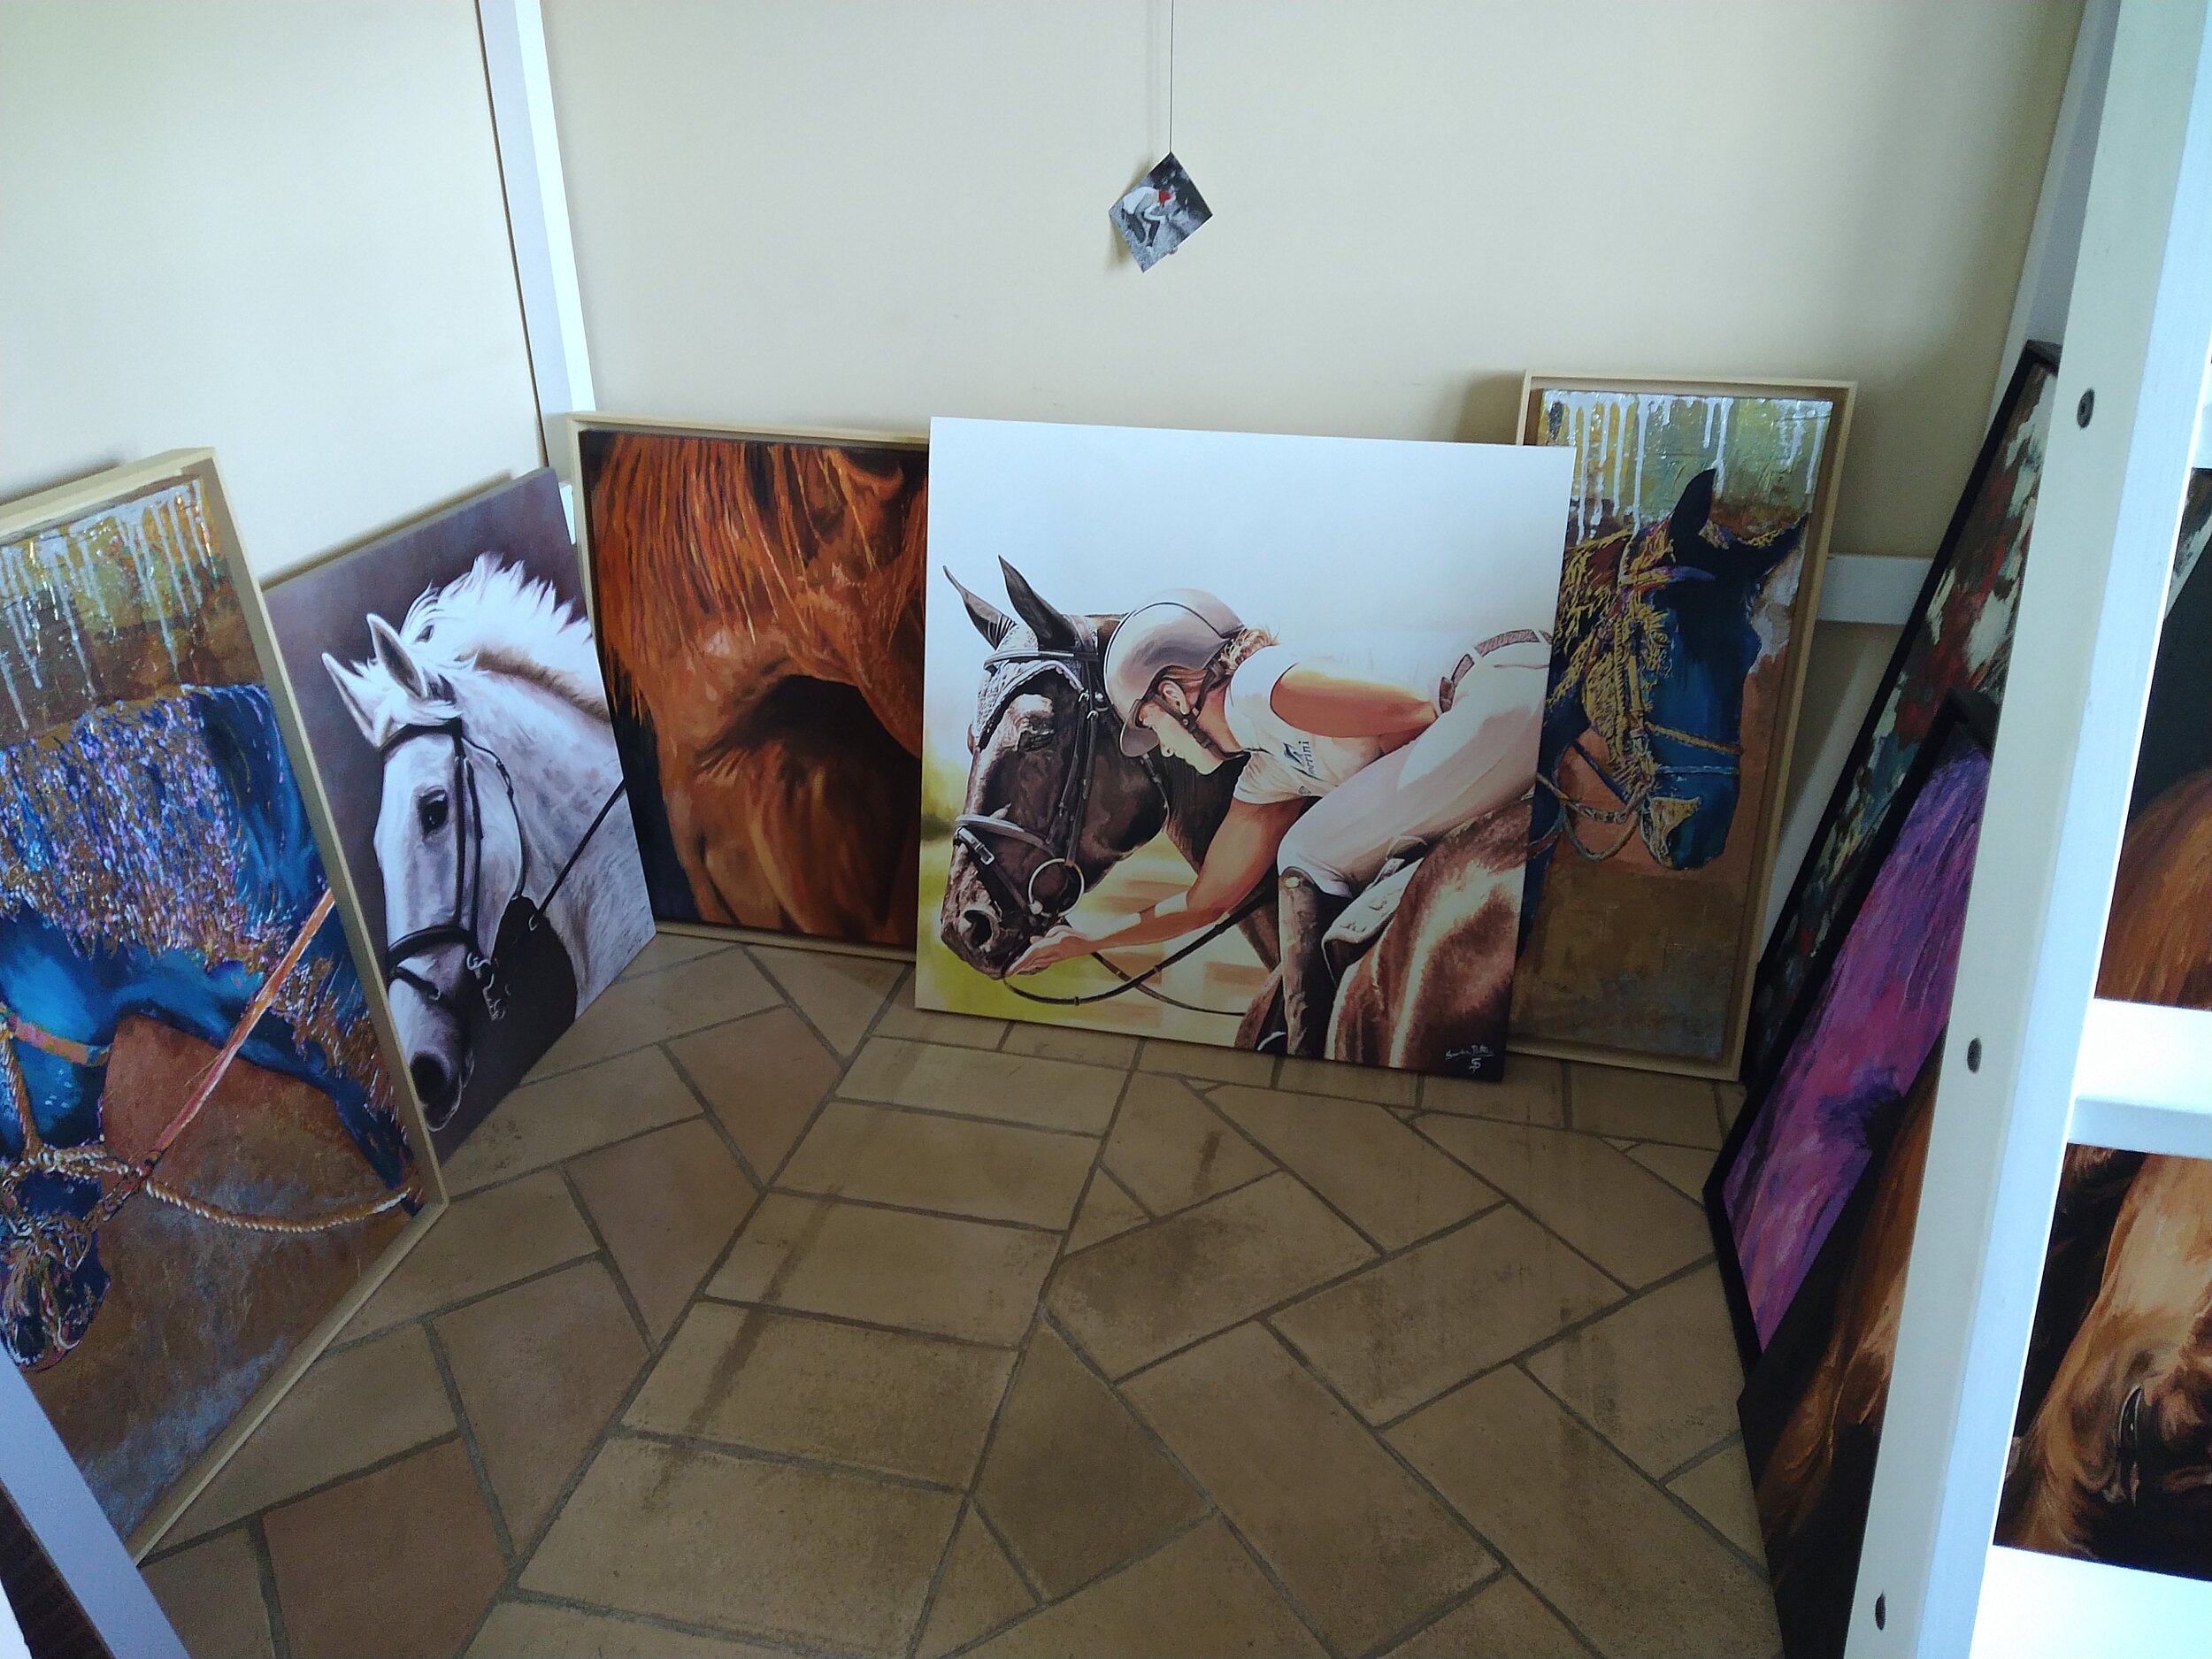  MONTERIGGIONI, Siena, Italy. June 3rd, 2021. PICTURED: Paintings of Sandra’s sit preparing to accompany her to her next exhibition on June 19th. 